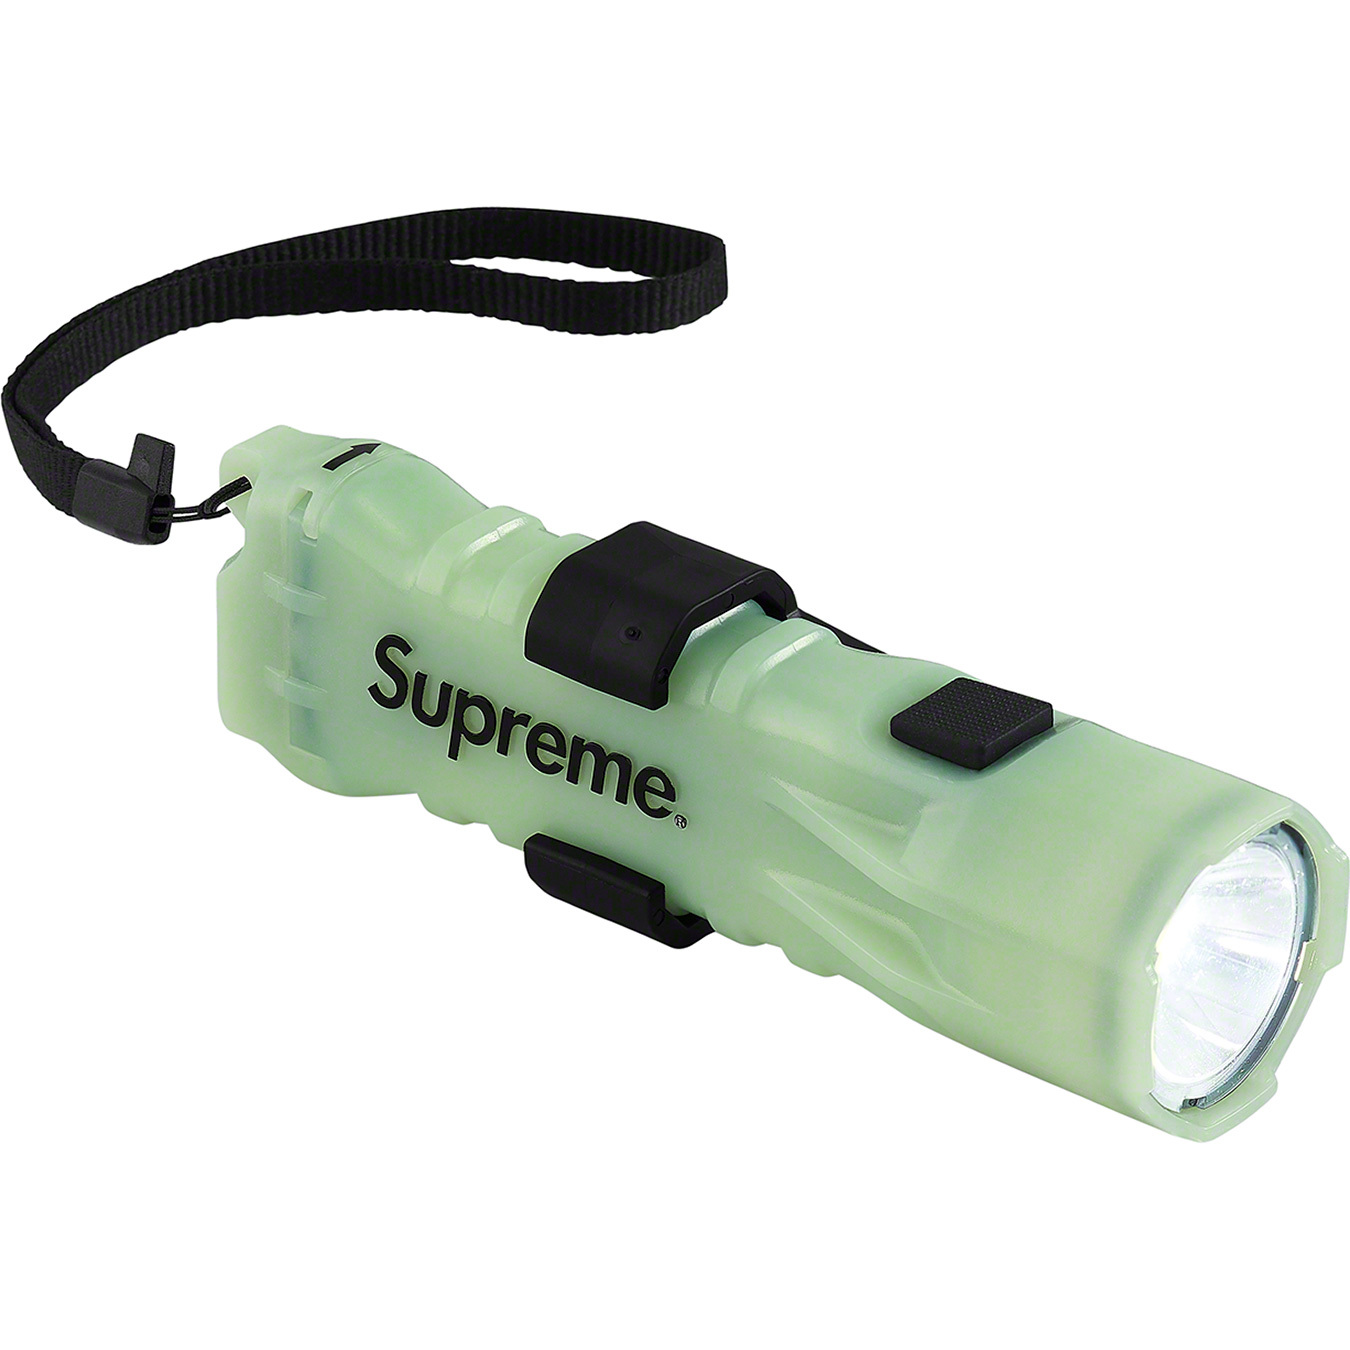 new Supreme X Pelican Glow In The Dark Flashlight 3310PL 202 hours one size 